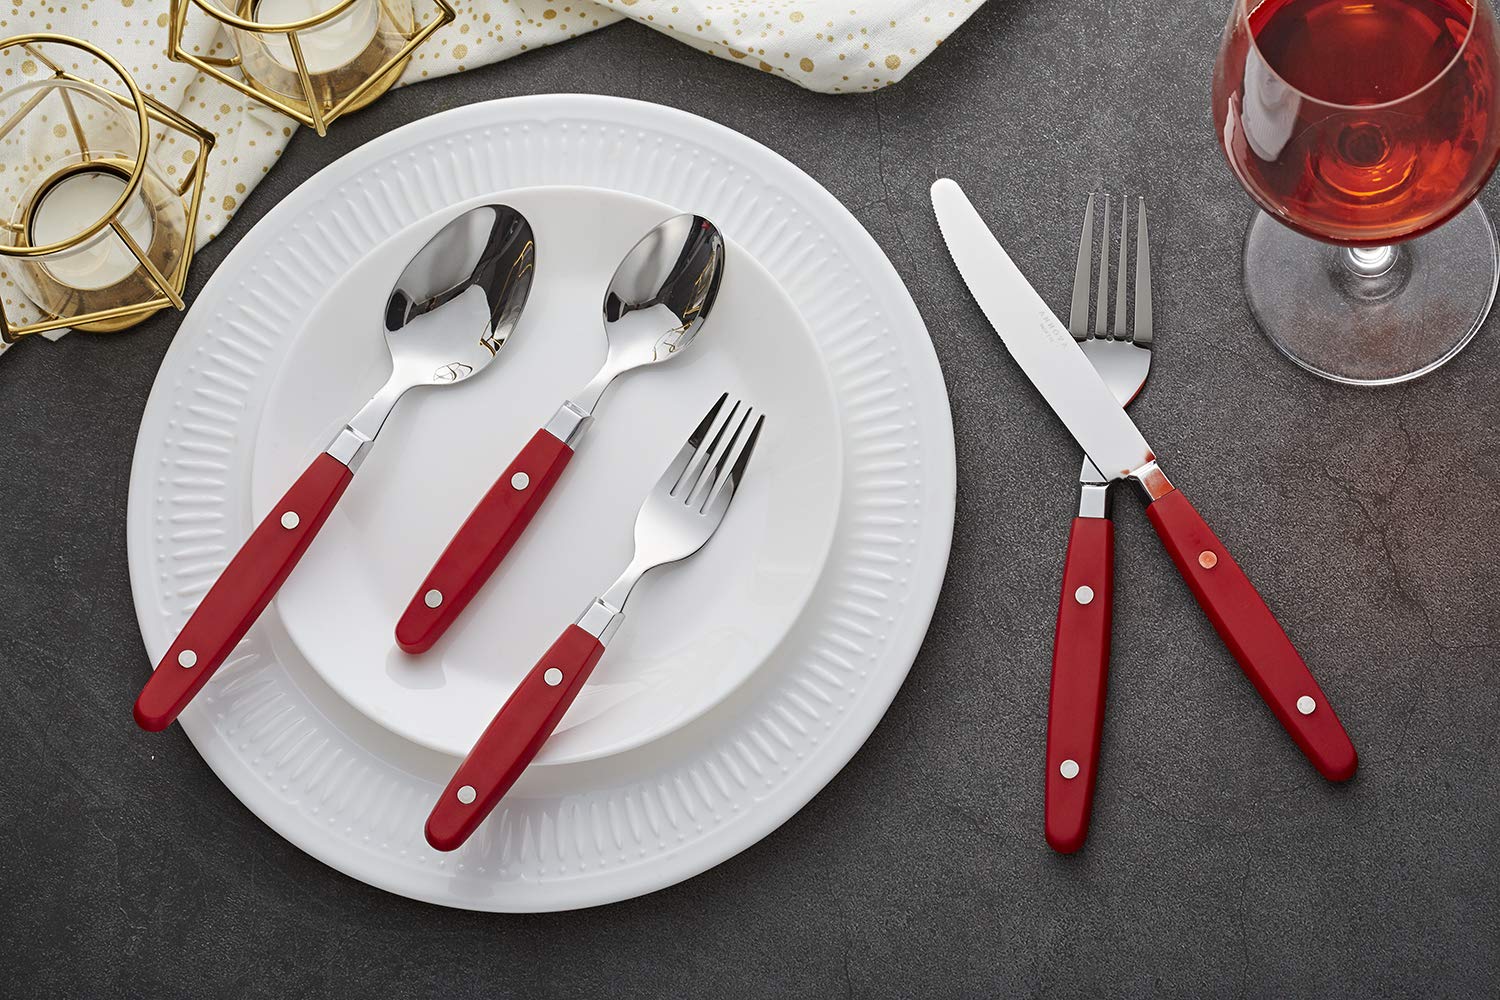 ANNOVA Silverware Set 20 Pieces Stainless Steel Cutlery Color Handle With Rivet/Retro Flatware - 4 x Dinner Knife; 4 x Dinner Fork; 4 x Salad fork; 4 x Dinner Spoon; 4 x Dessert Spoon (Red) Christmas